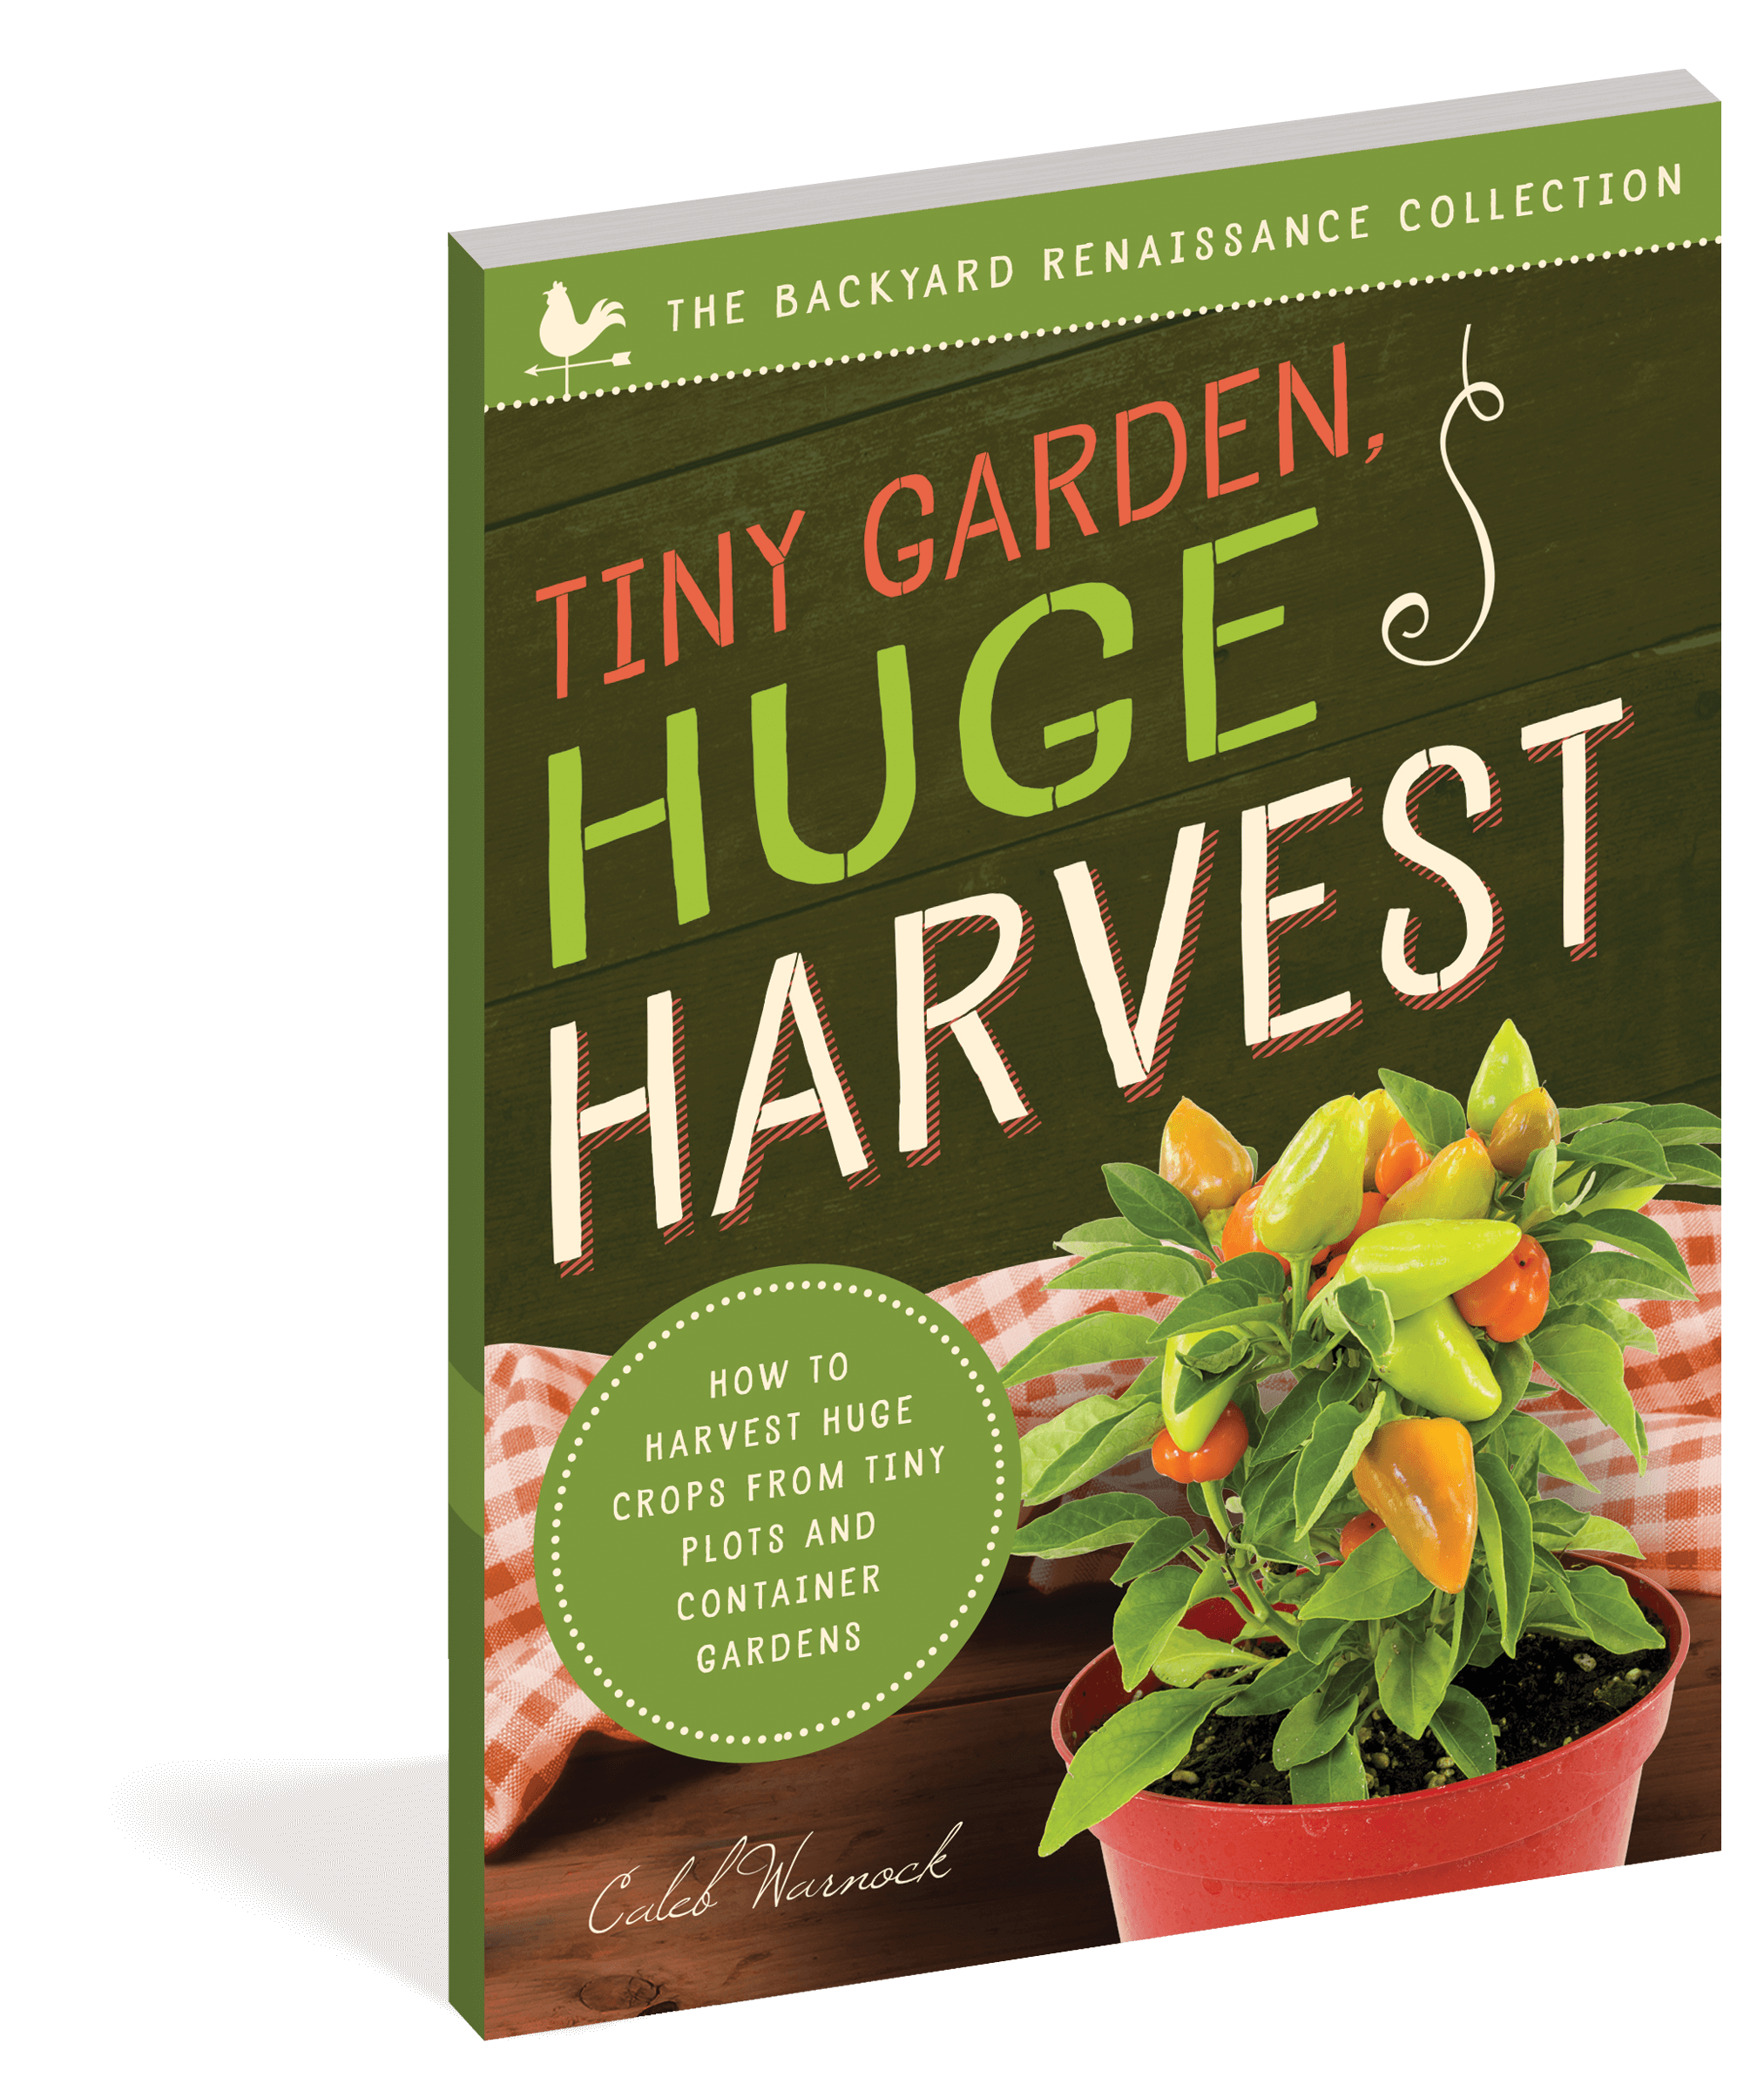 The cover of the book Tiny Garden, Huge Harvest.